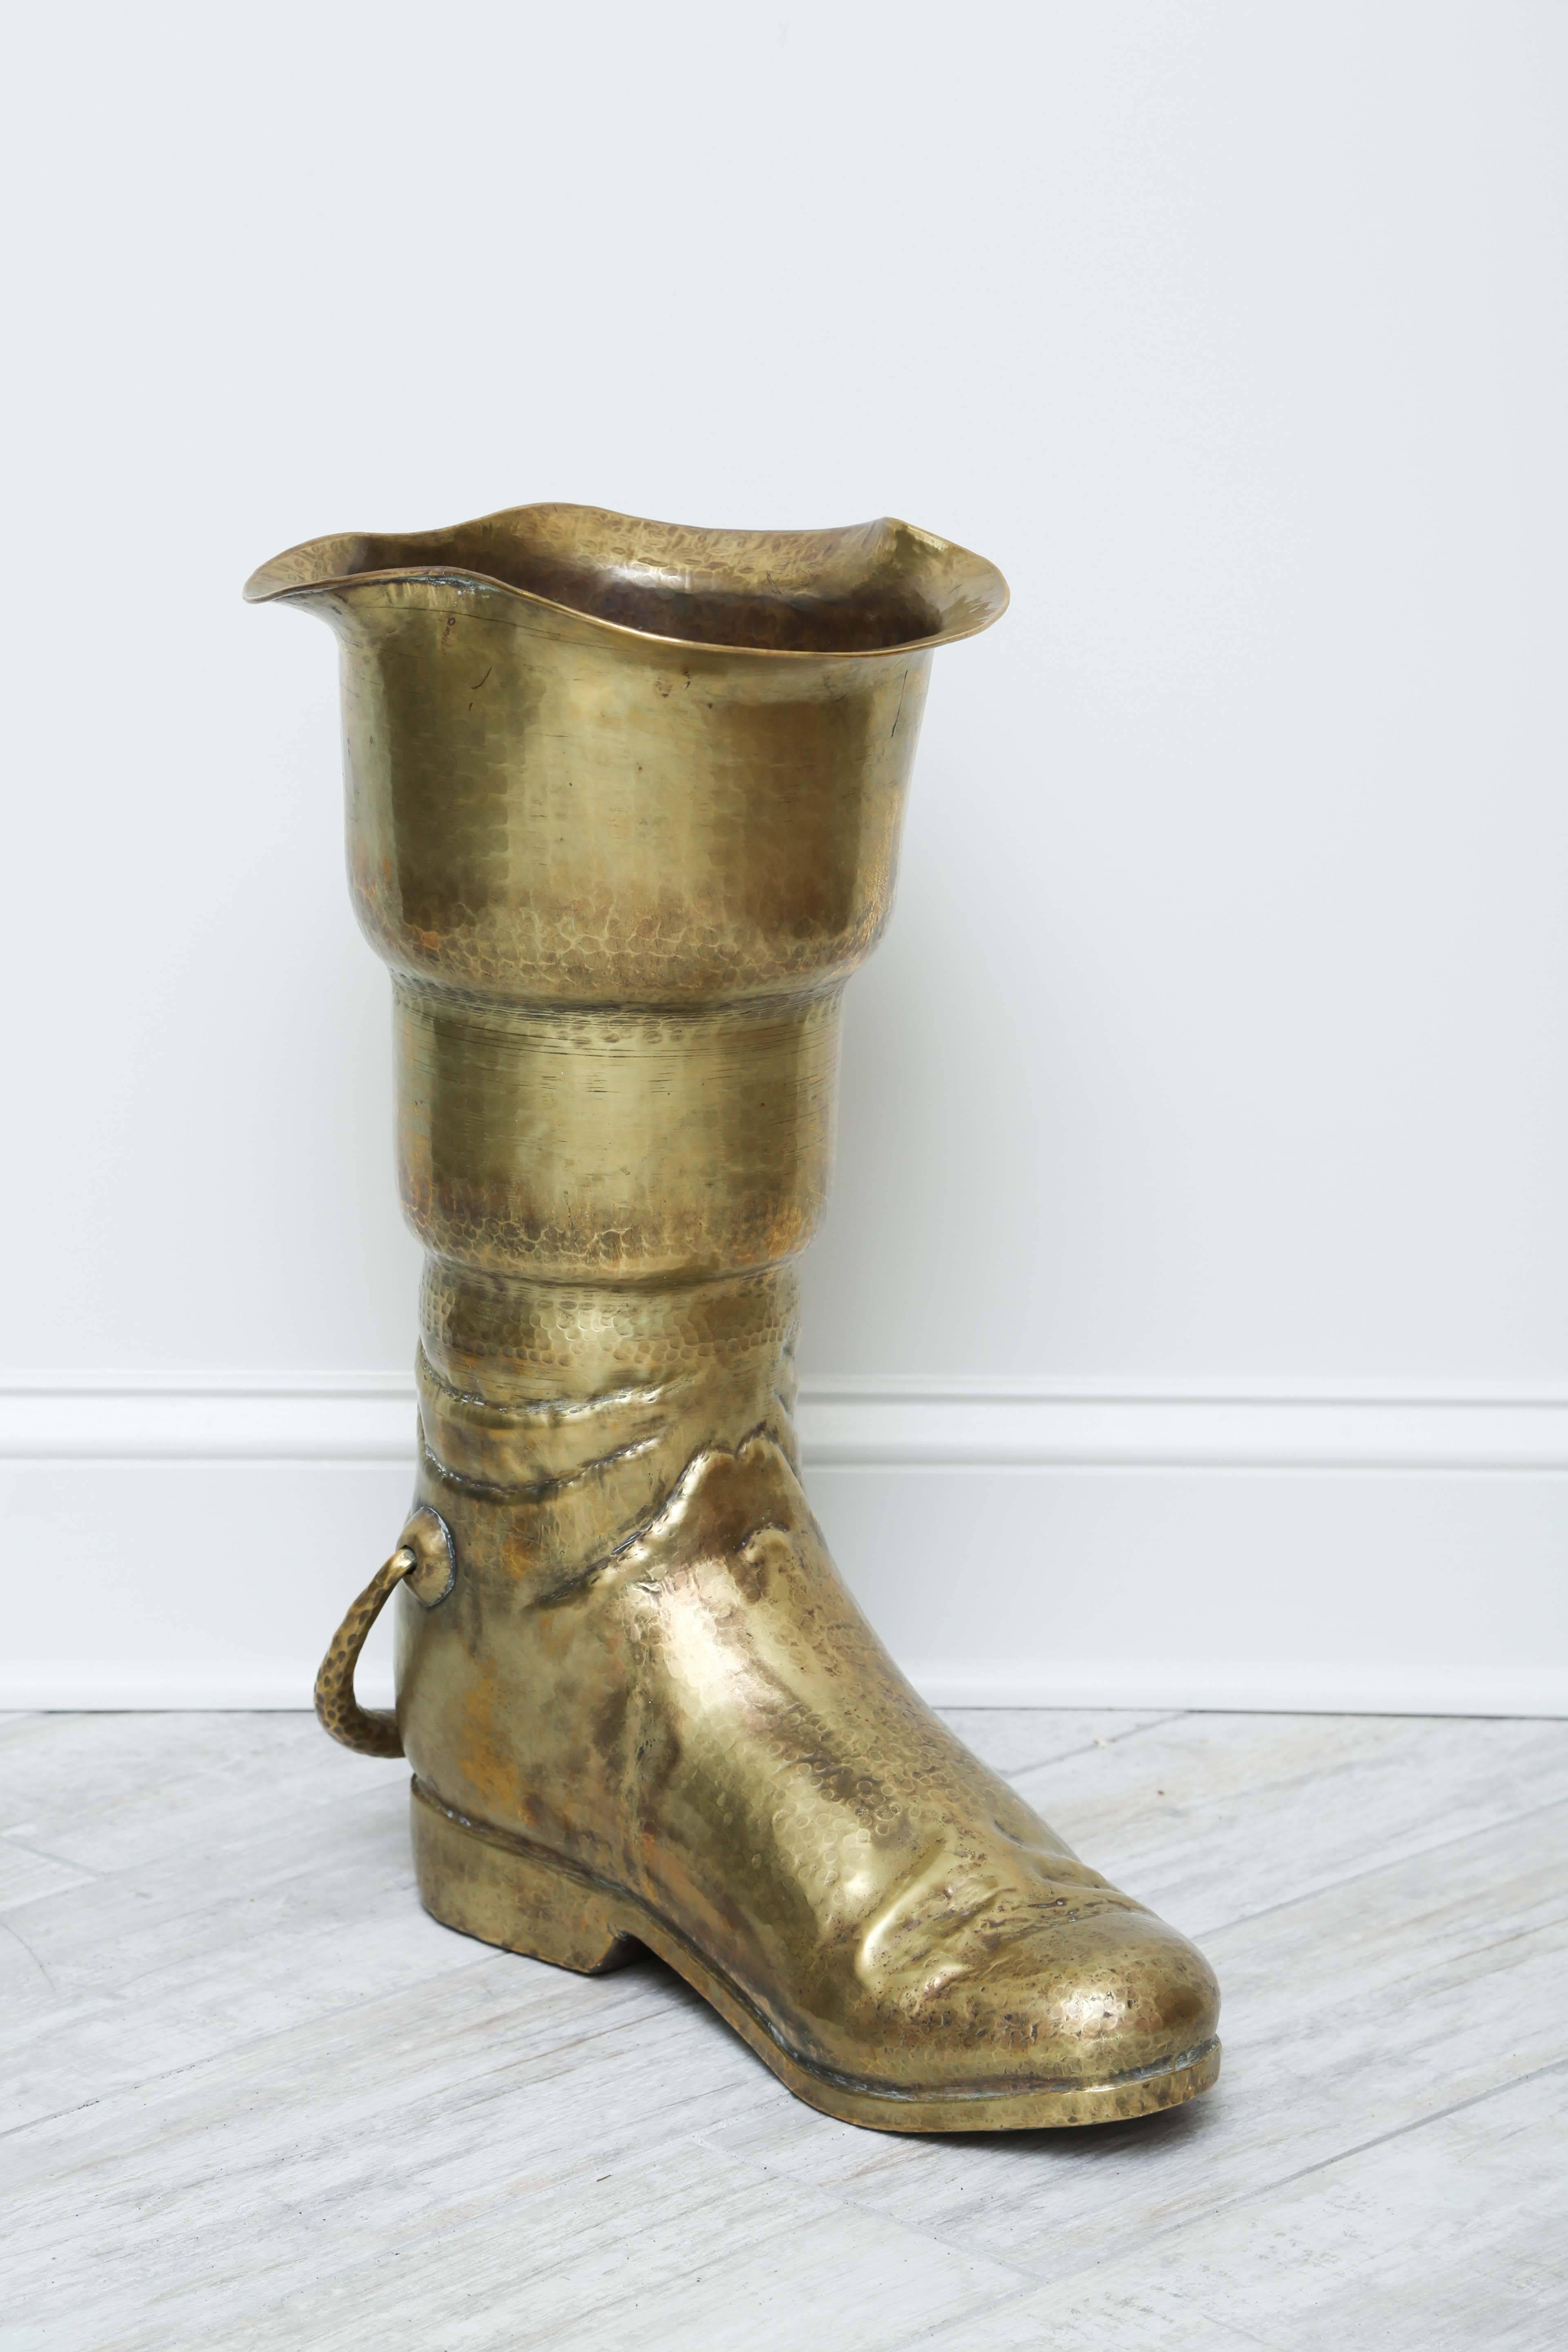 Limited edition (156/600) hand-forged brass boot umbrella stand made in Italy.